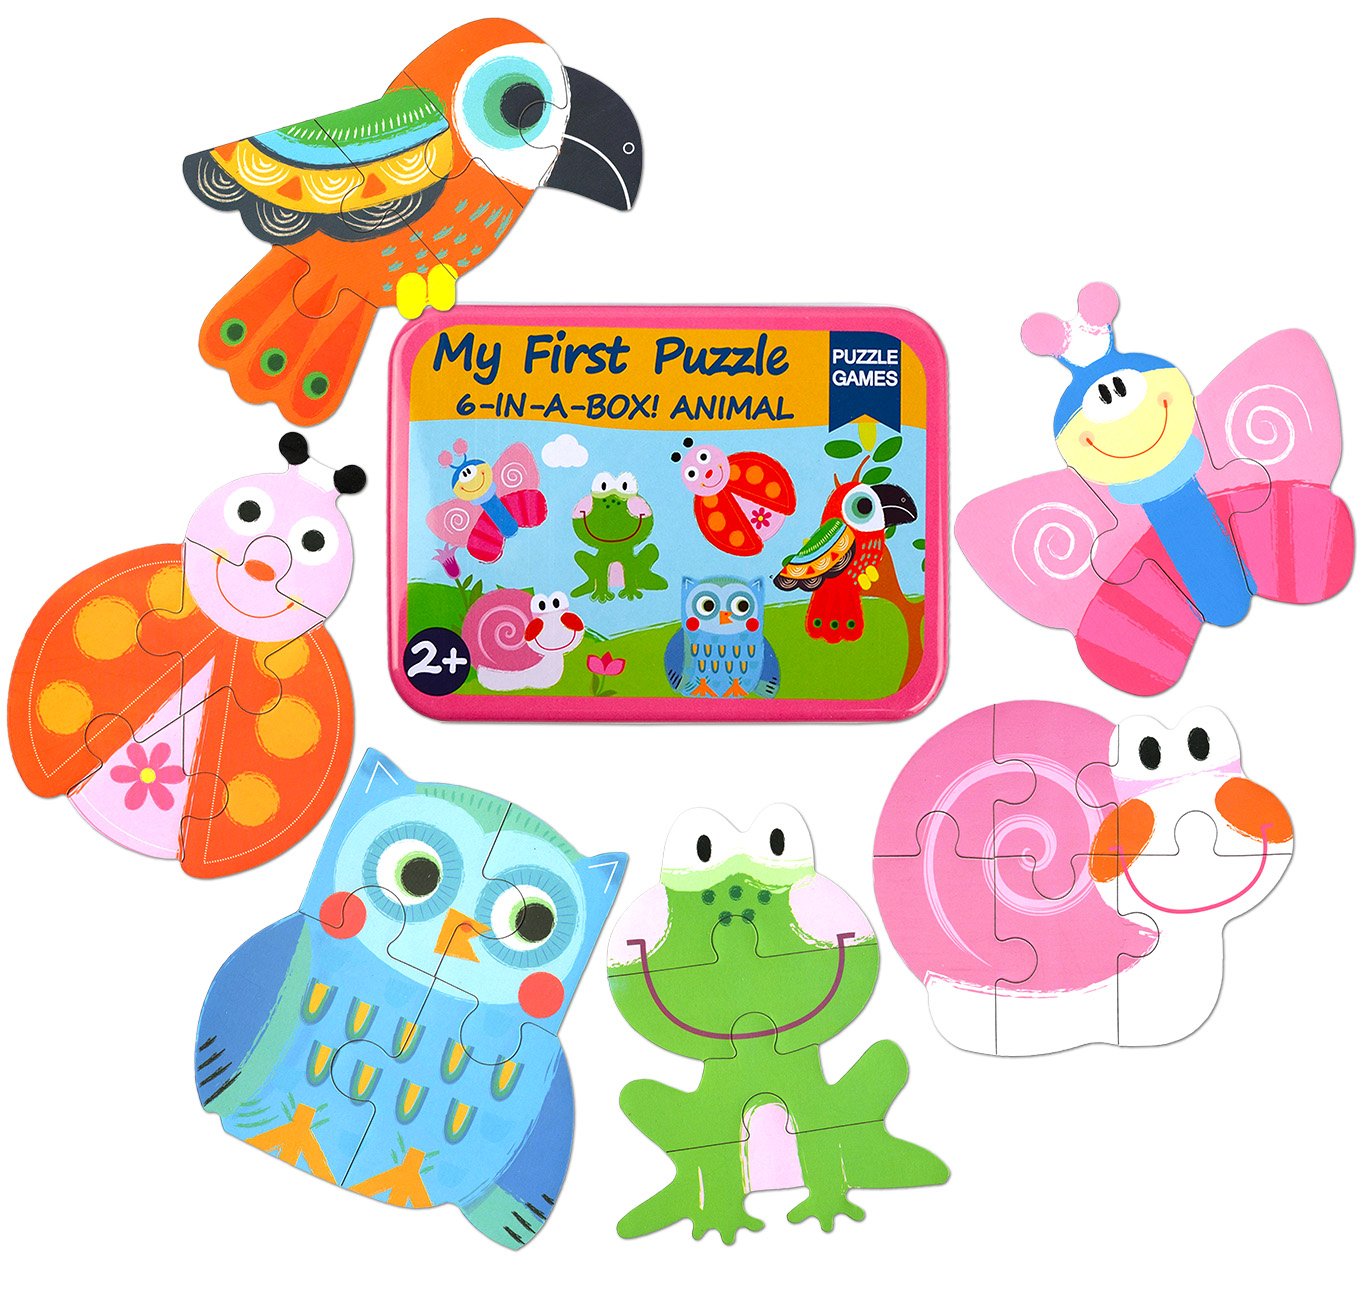 Vileafy Simple Floor Puzzles for Toddlers, 6-in-1 Beginners Jigsaw Puzzles